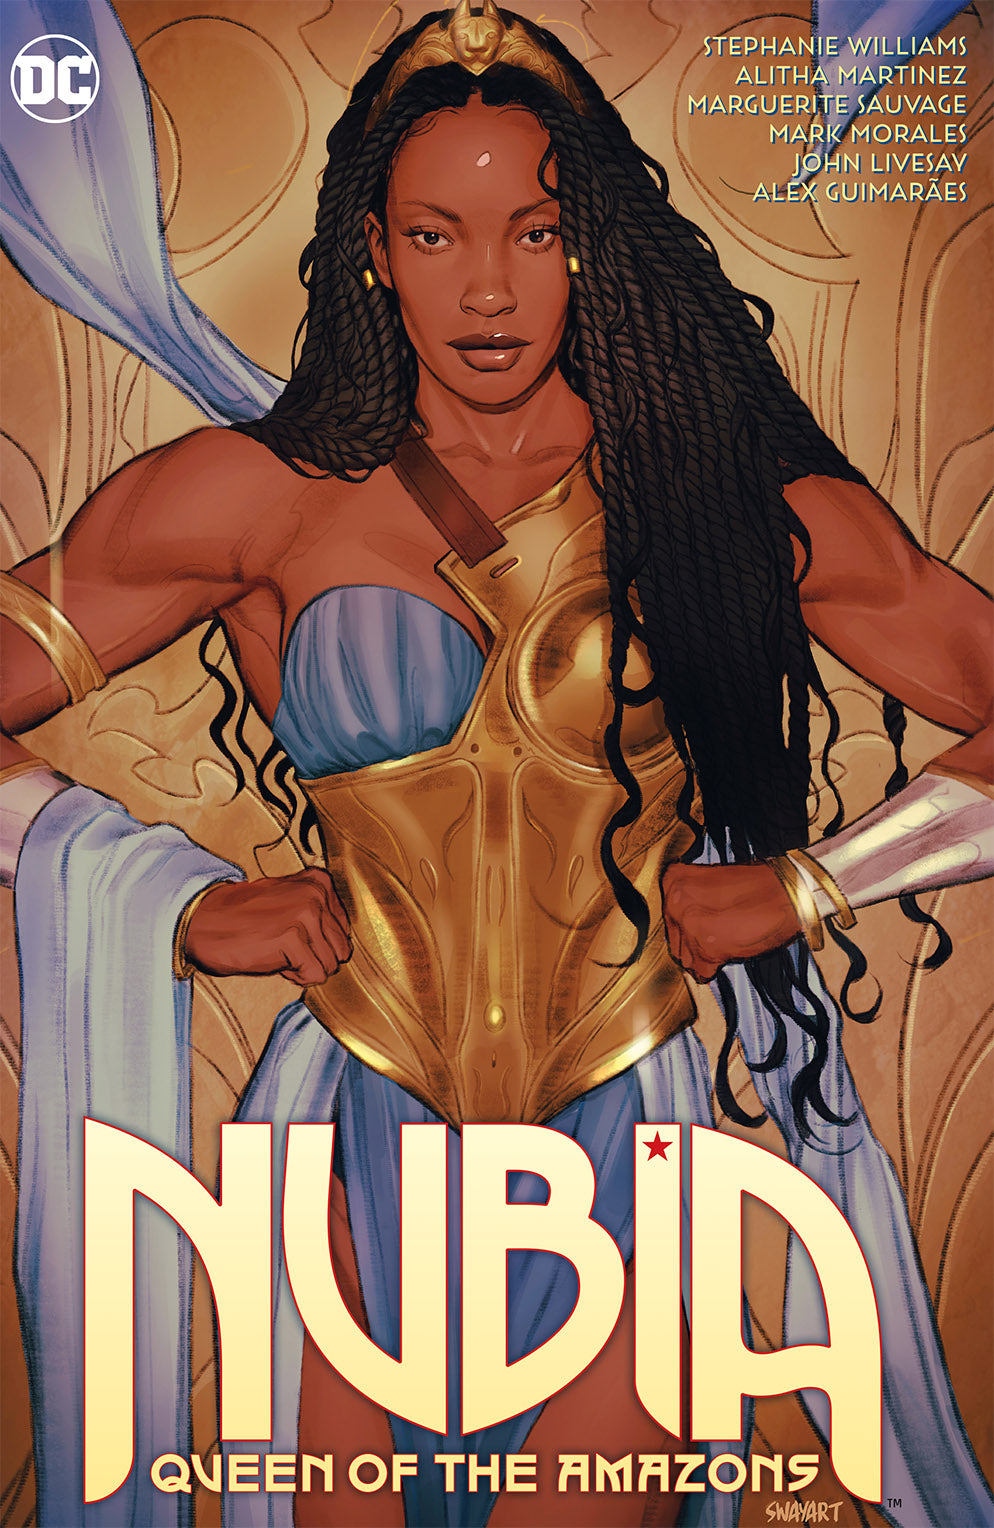 NUBIA QUEEN OF THE AMAZONS HARDCOVER